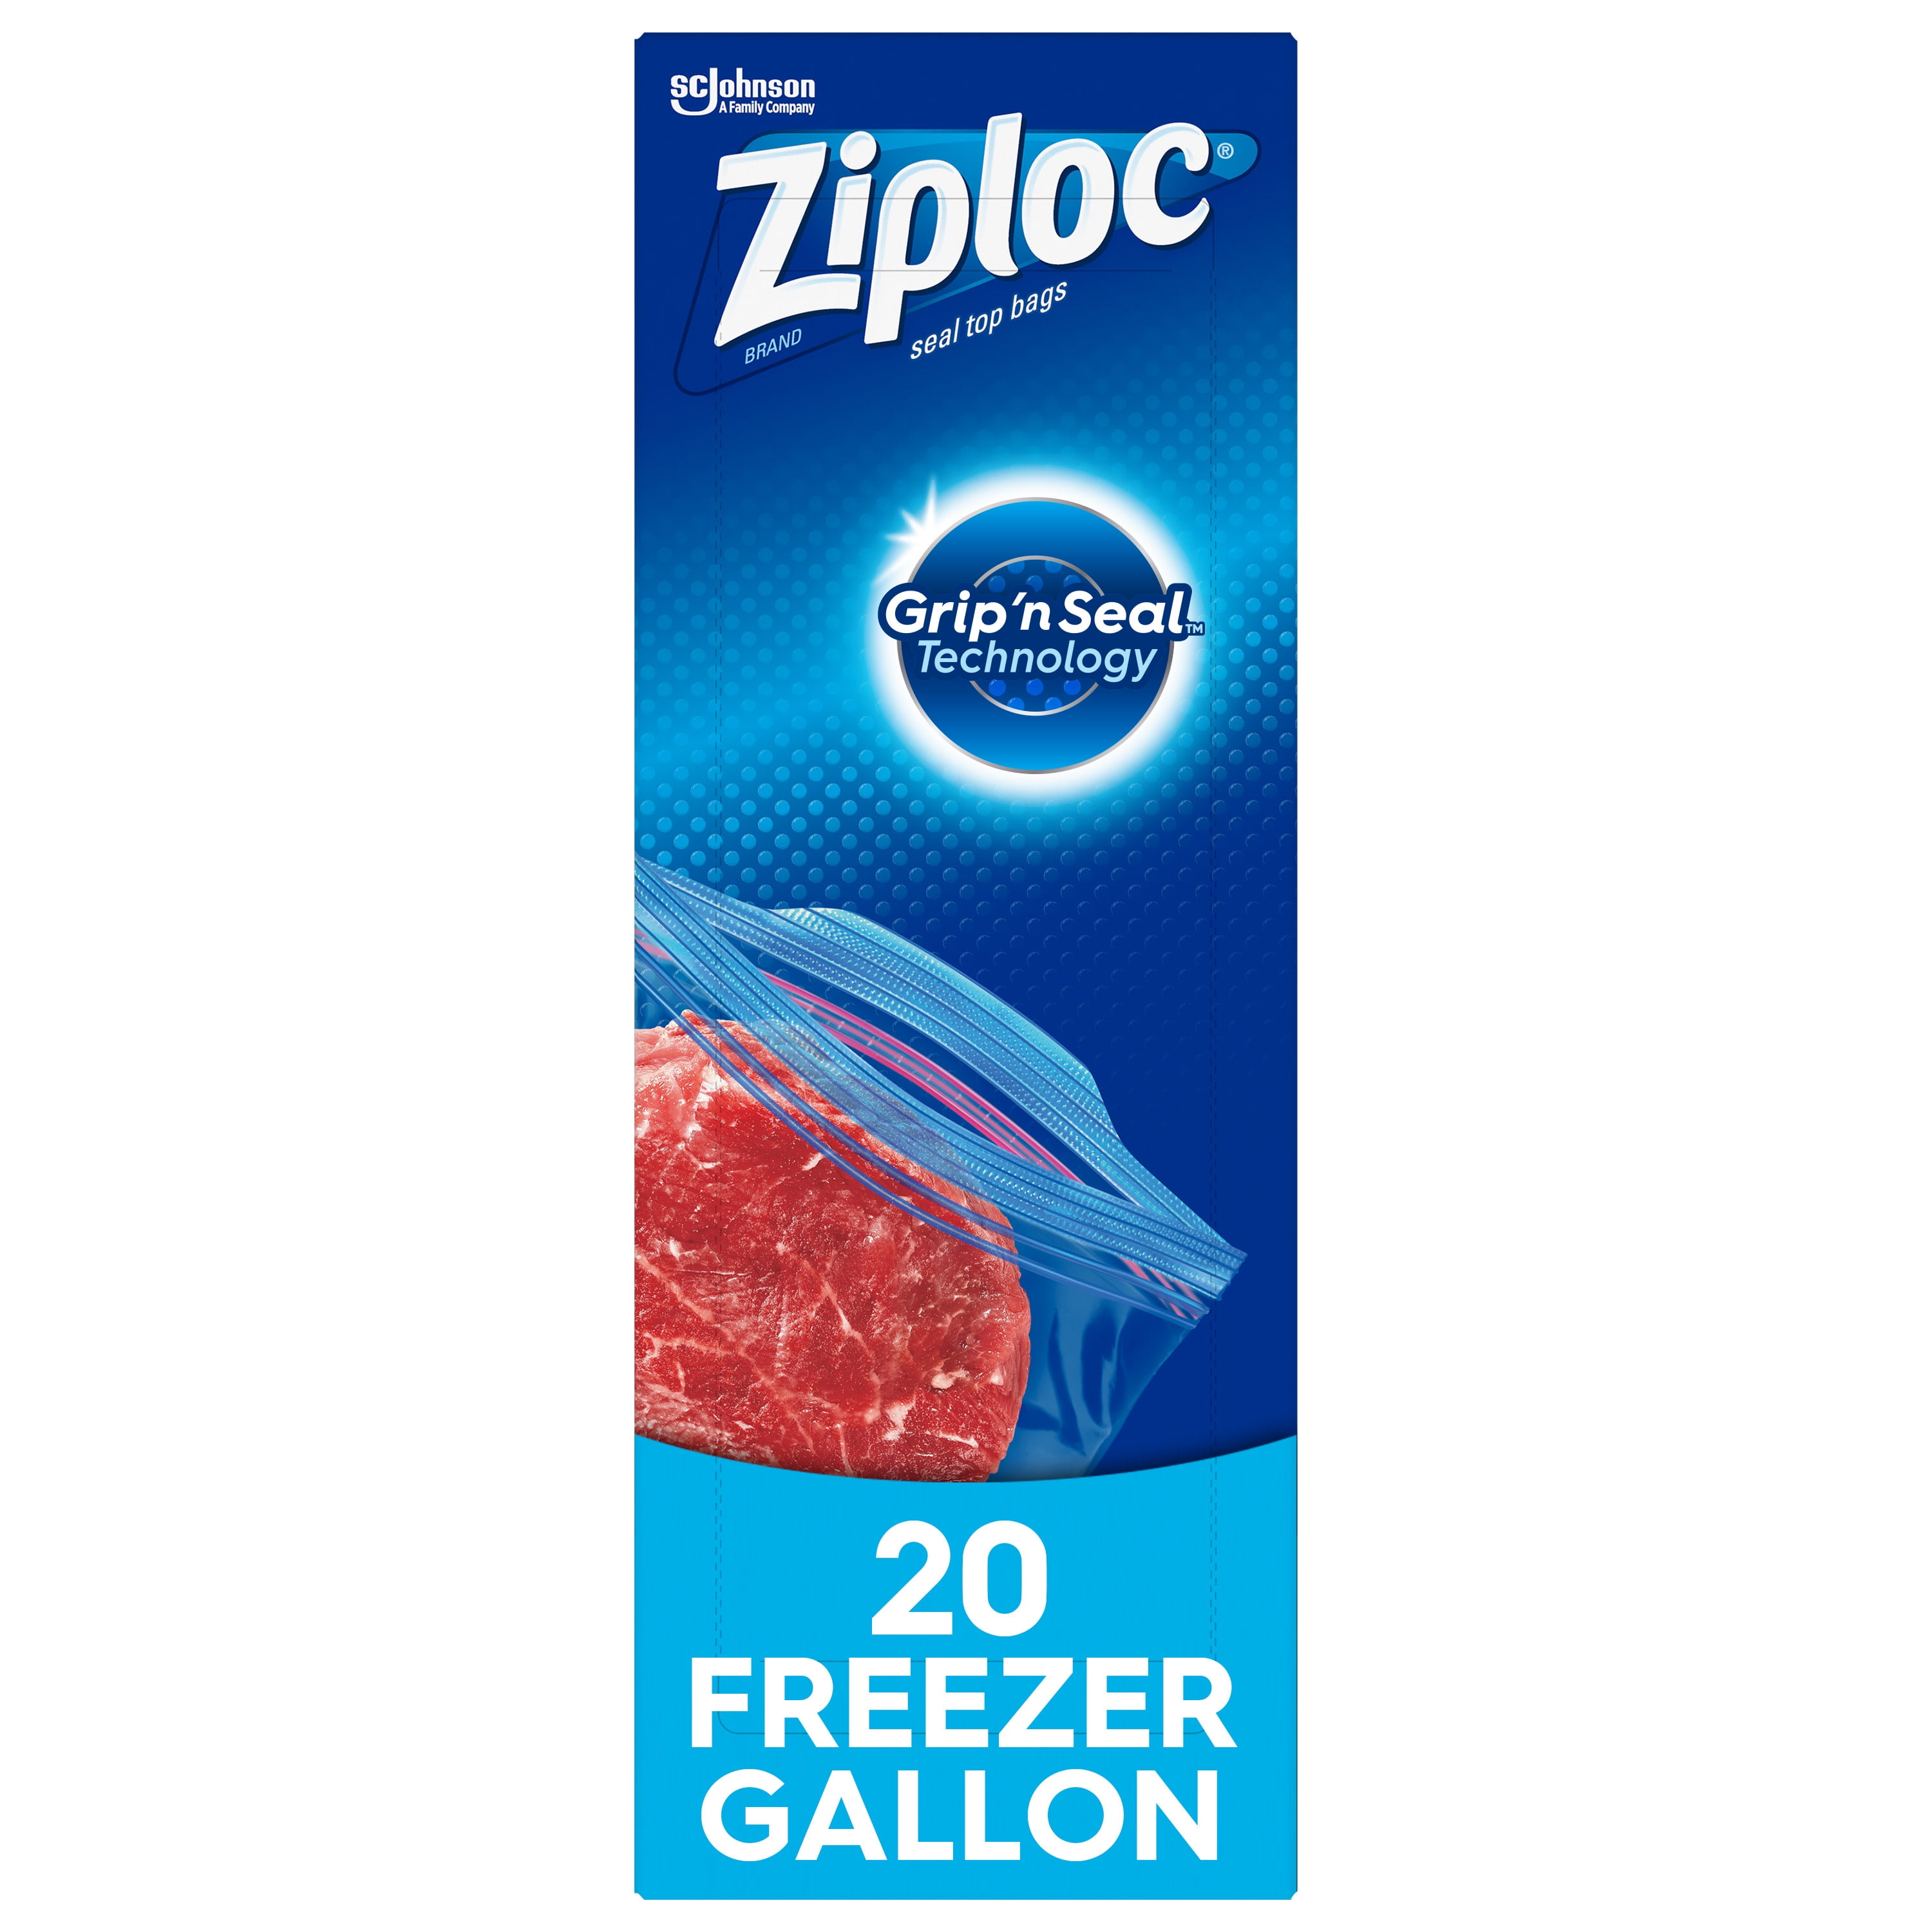 New Slide Zip Food & Freezer Bags keep food secure,and seals in freshness 40pk. 